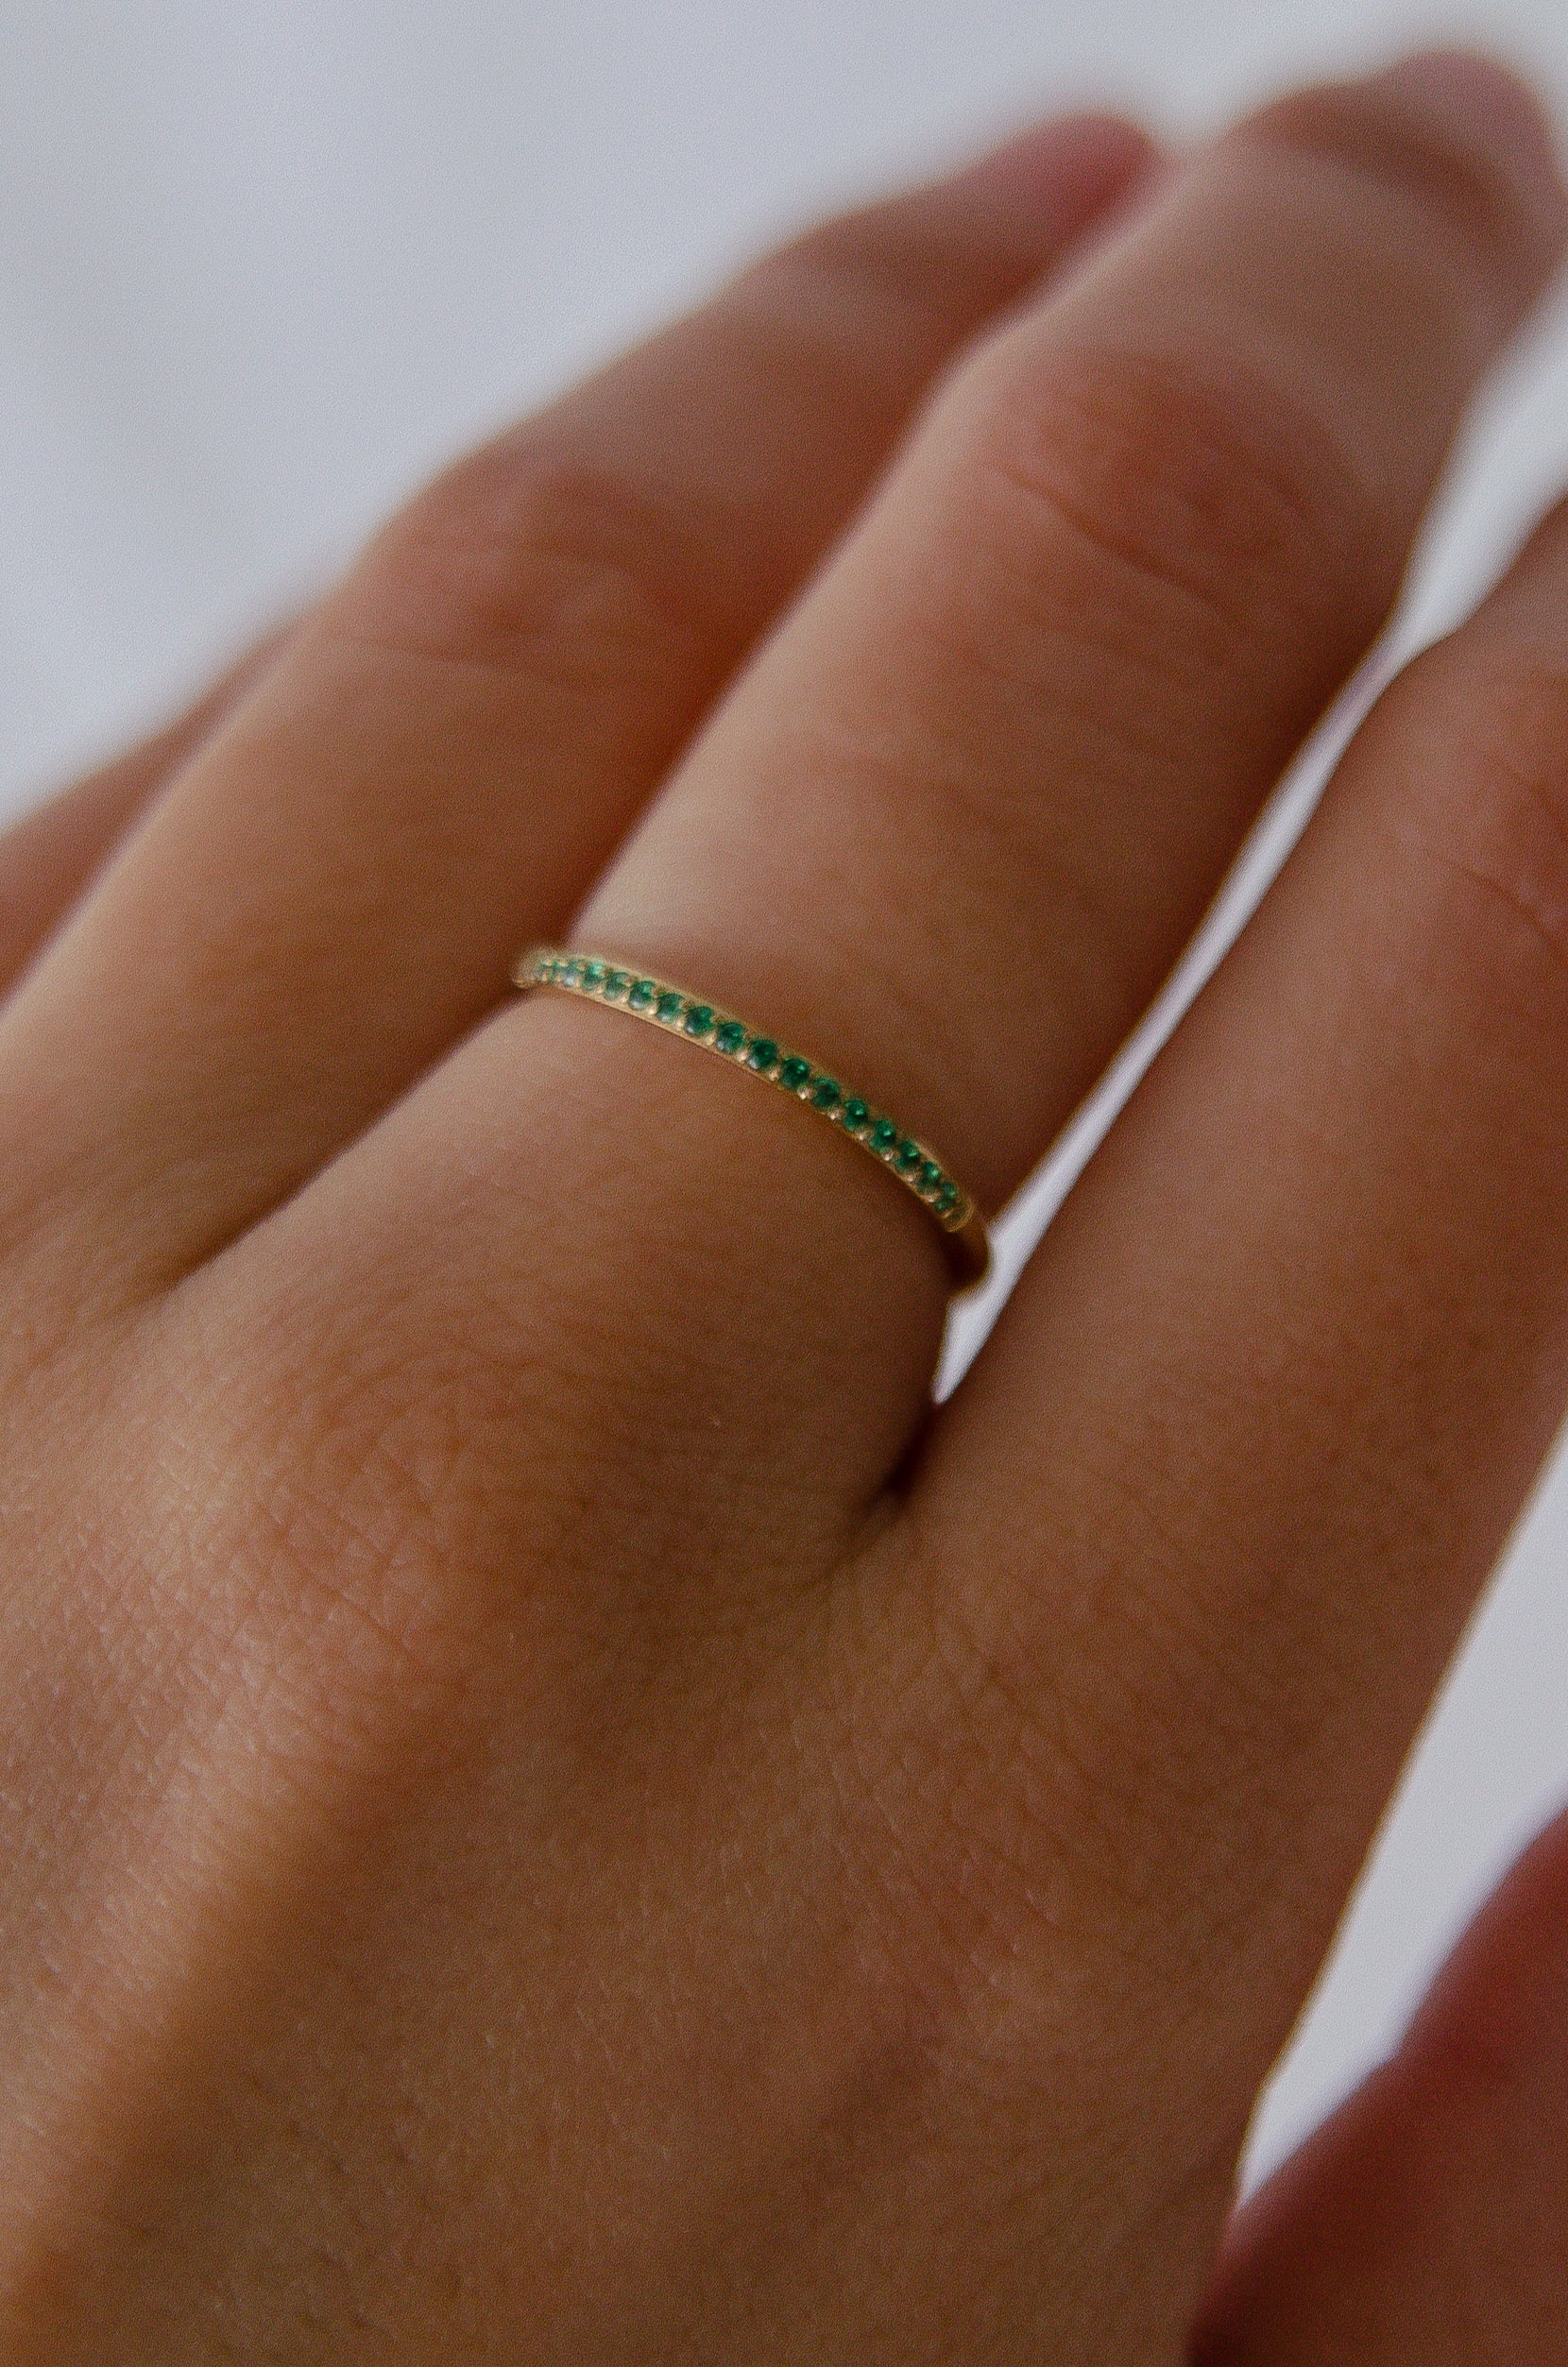 GREEN SPARKLE RING